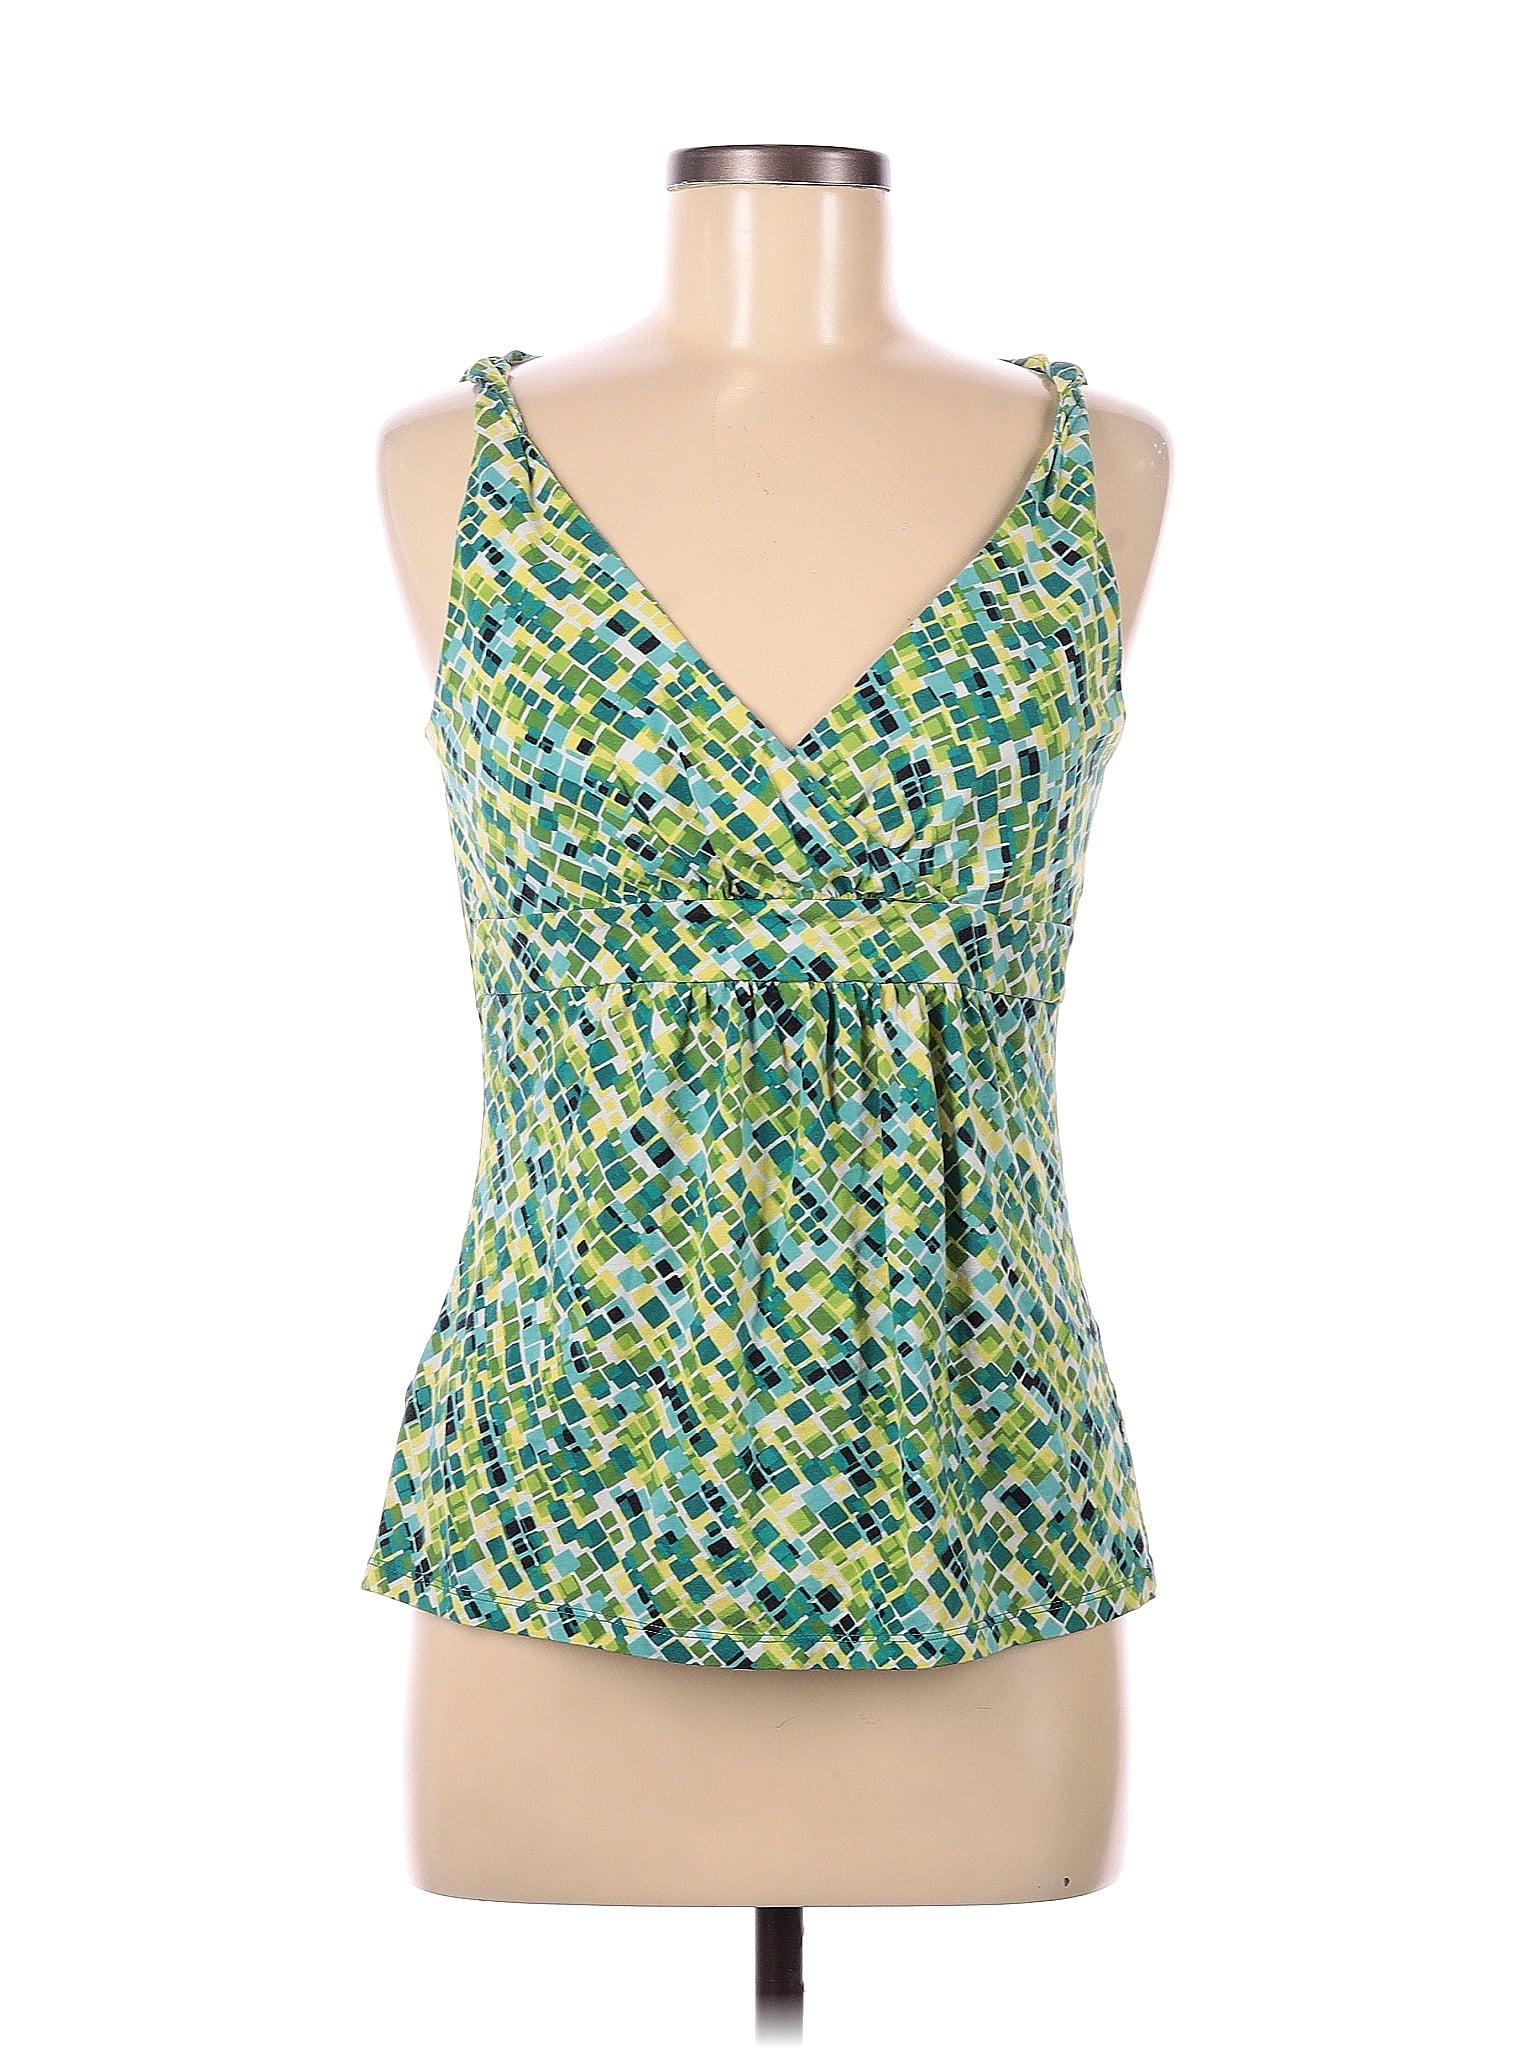 Ann Taylor Factory Multi Color Green Sleeveless Top Size M - 15% off ...